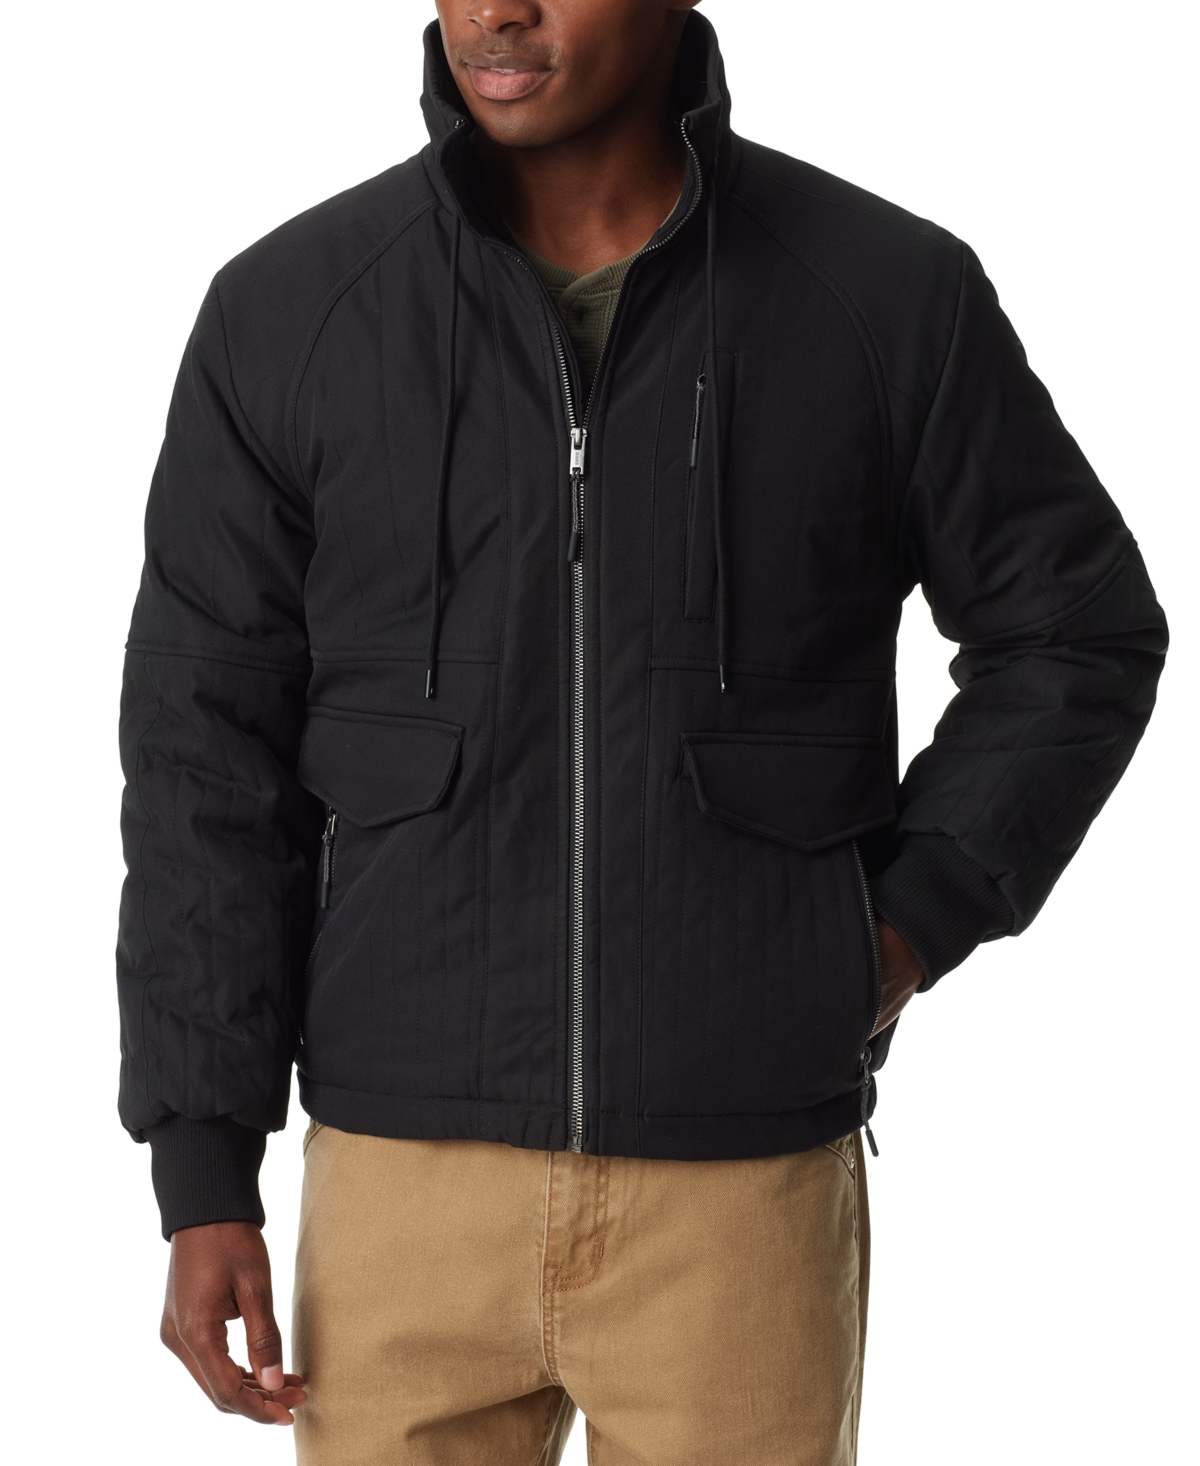 Men's Quilted Bomber Jacket - Ermine